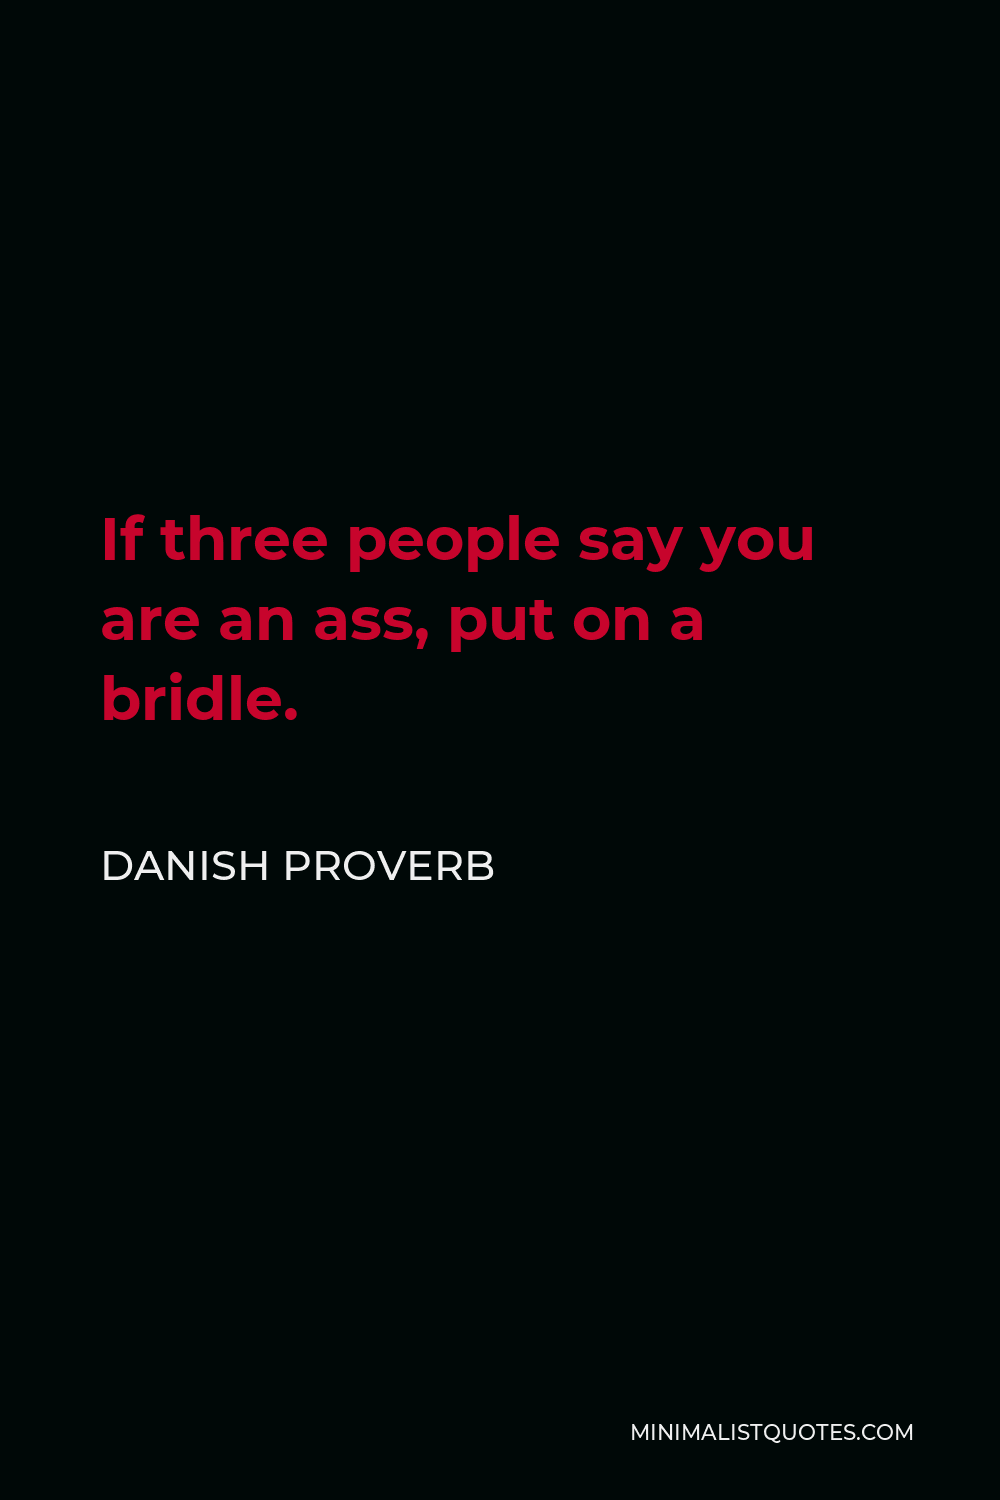 Danish Proverb Quote - If three people say you are an ass, put on a bridle.